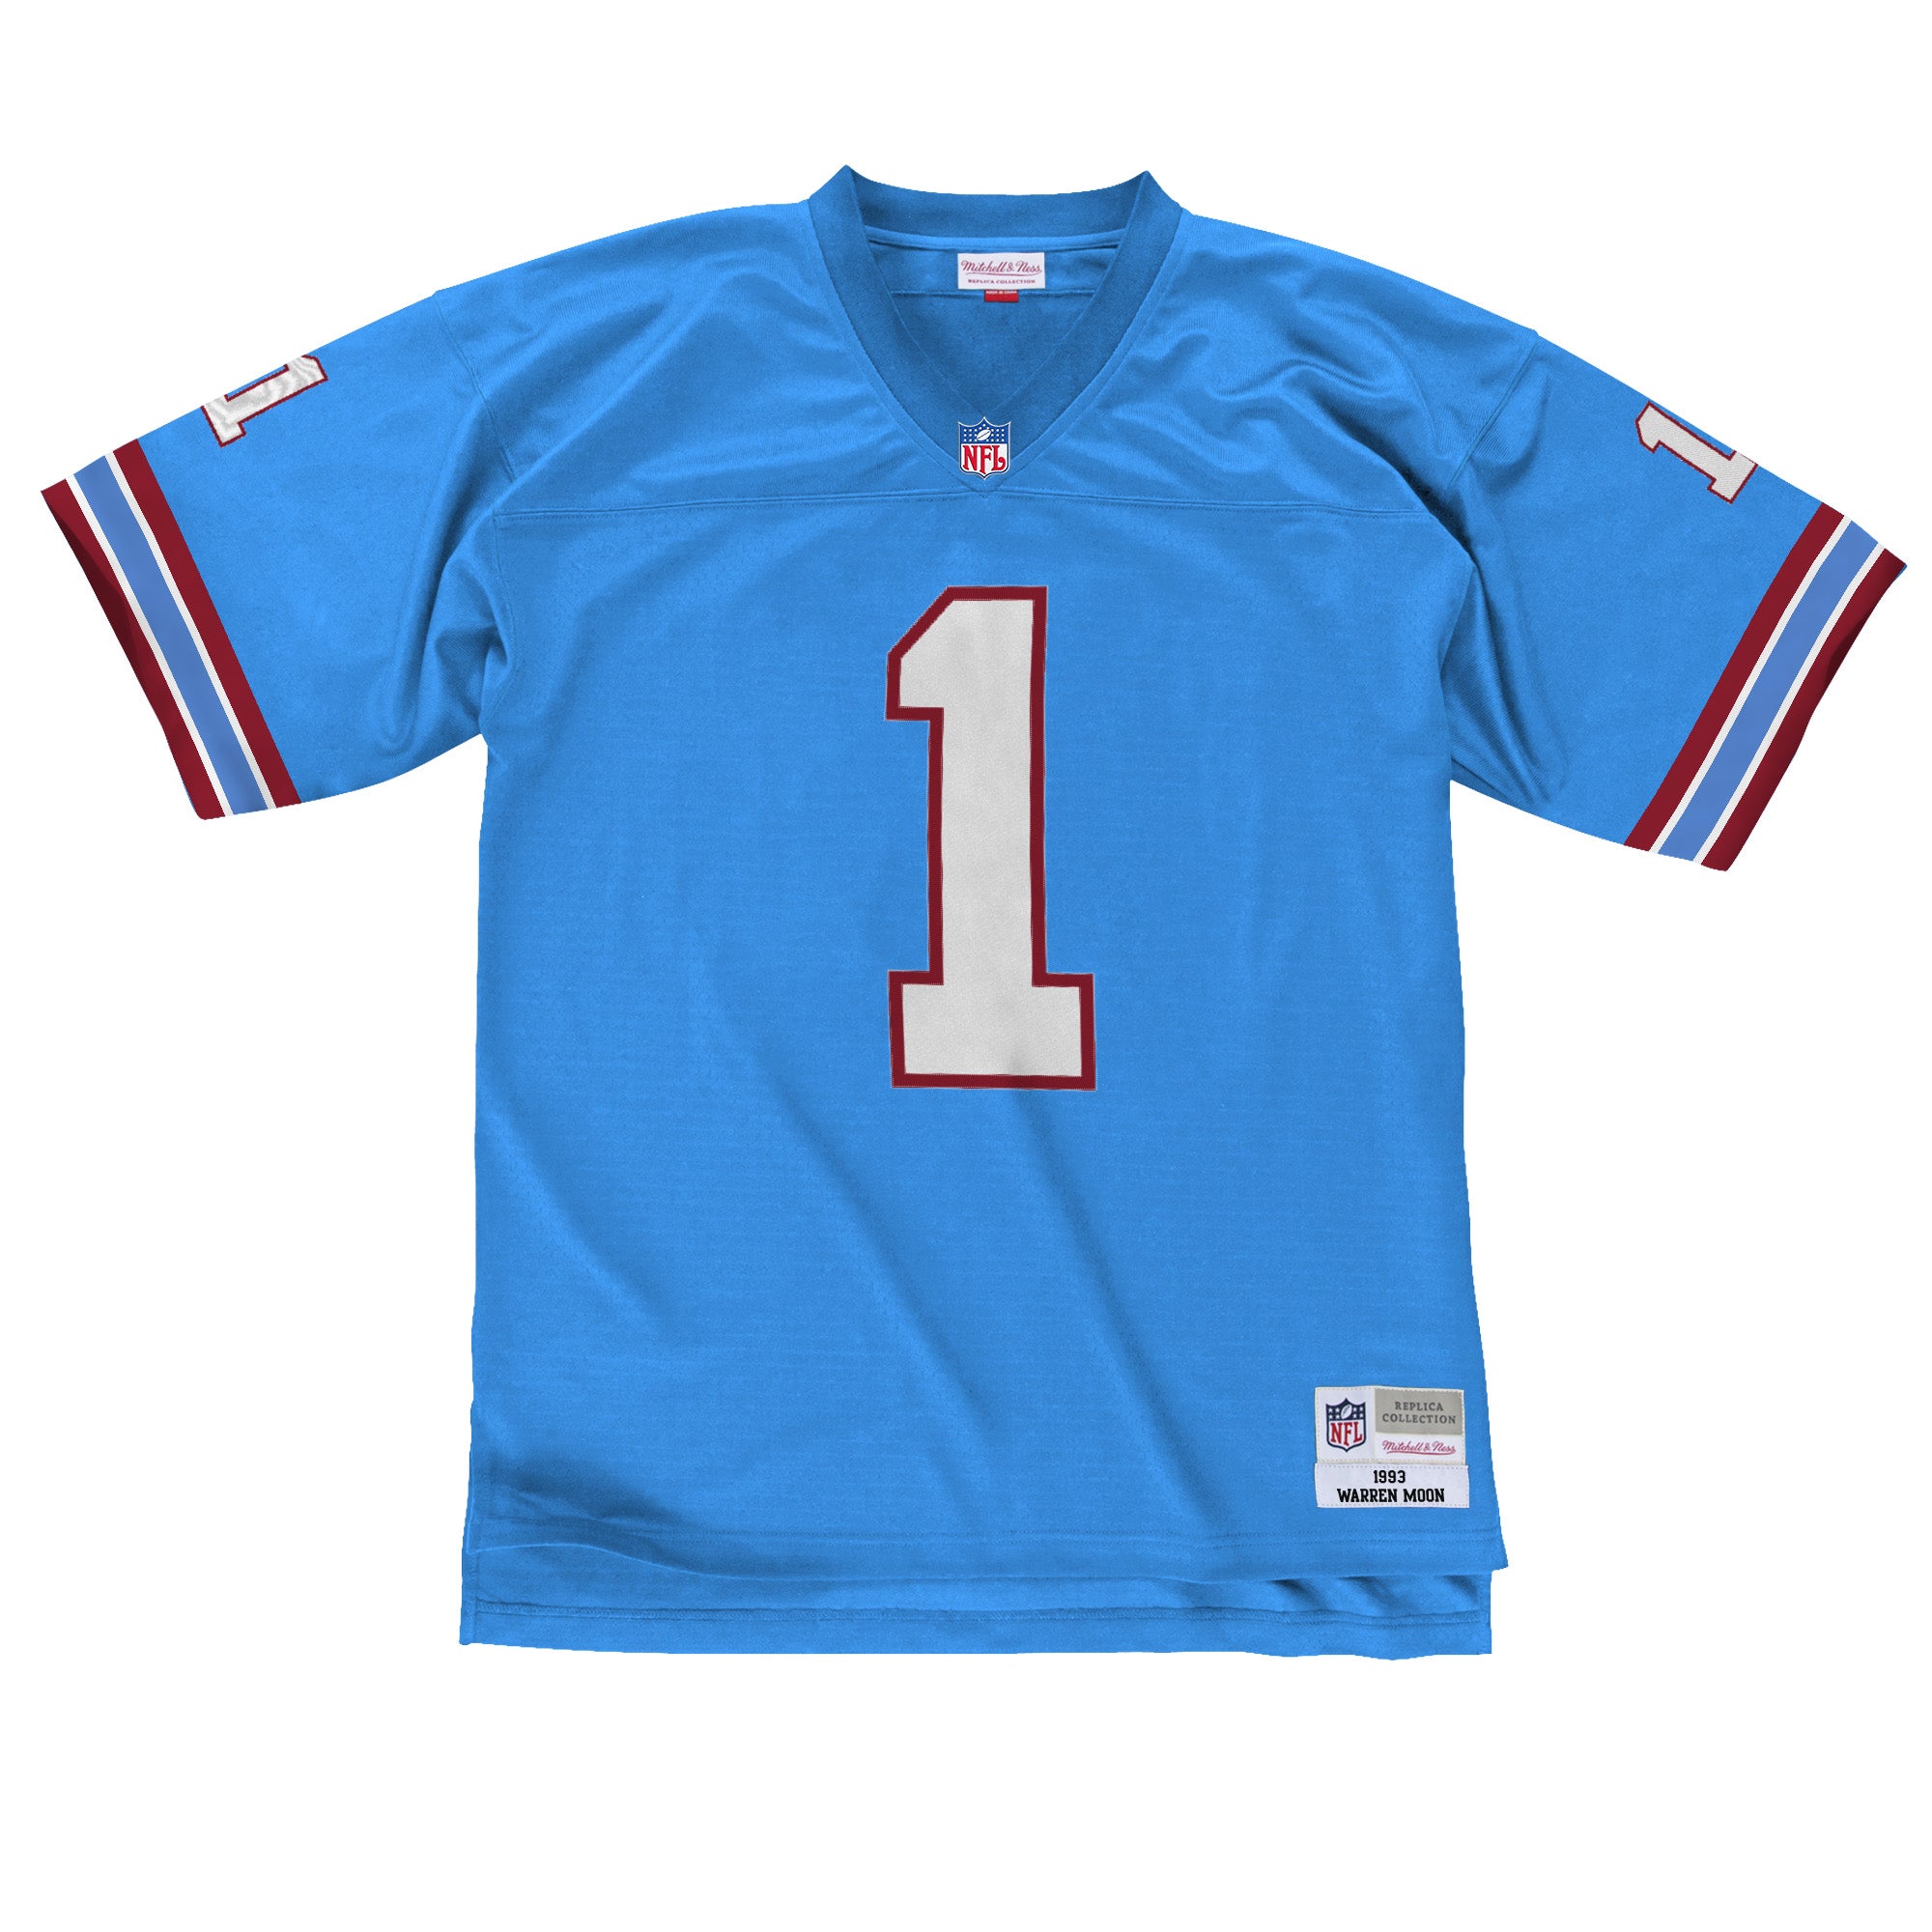 where can i get authentic nfl jerseys